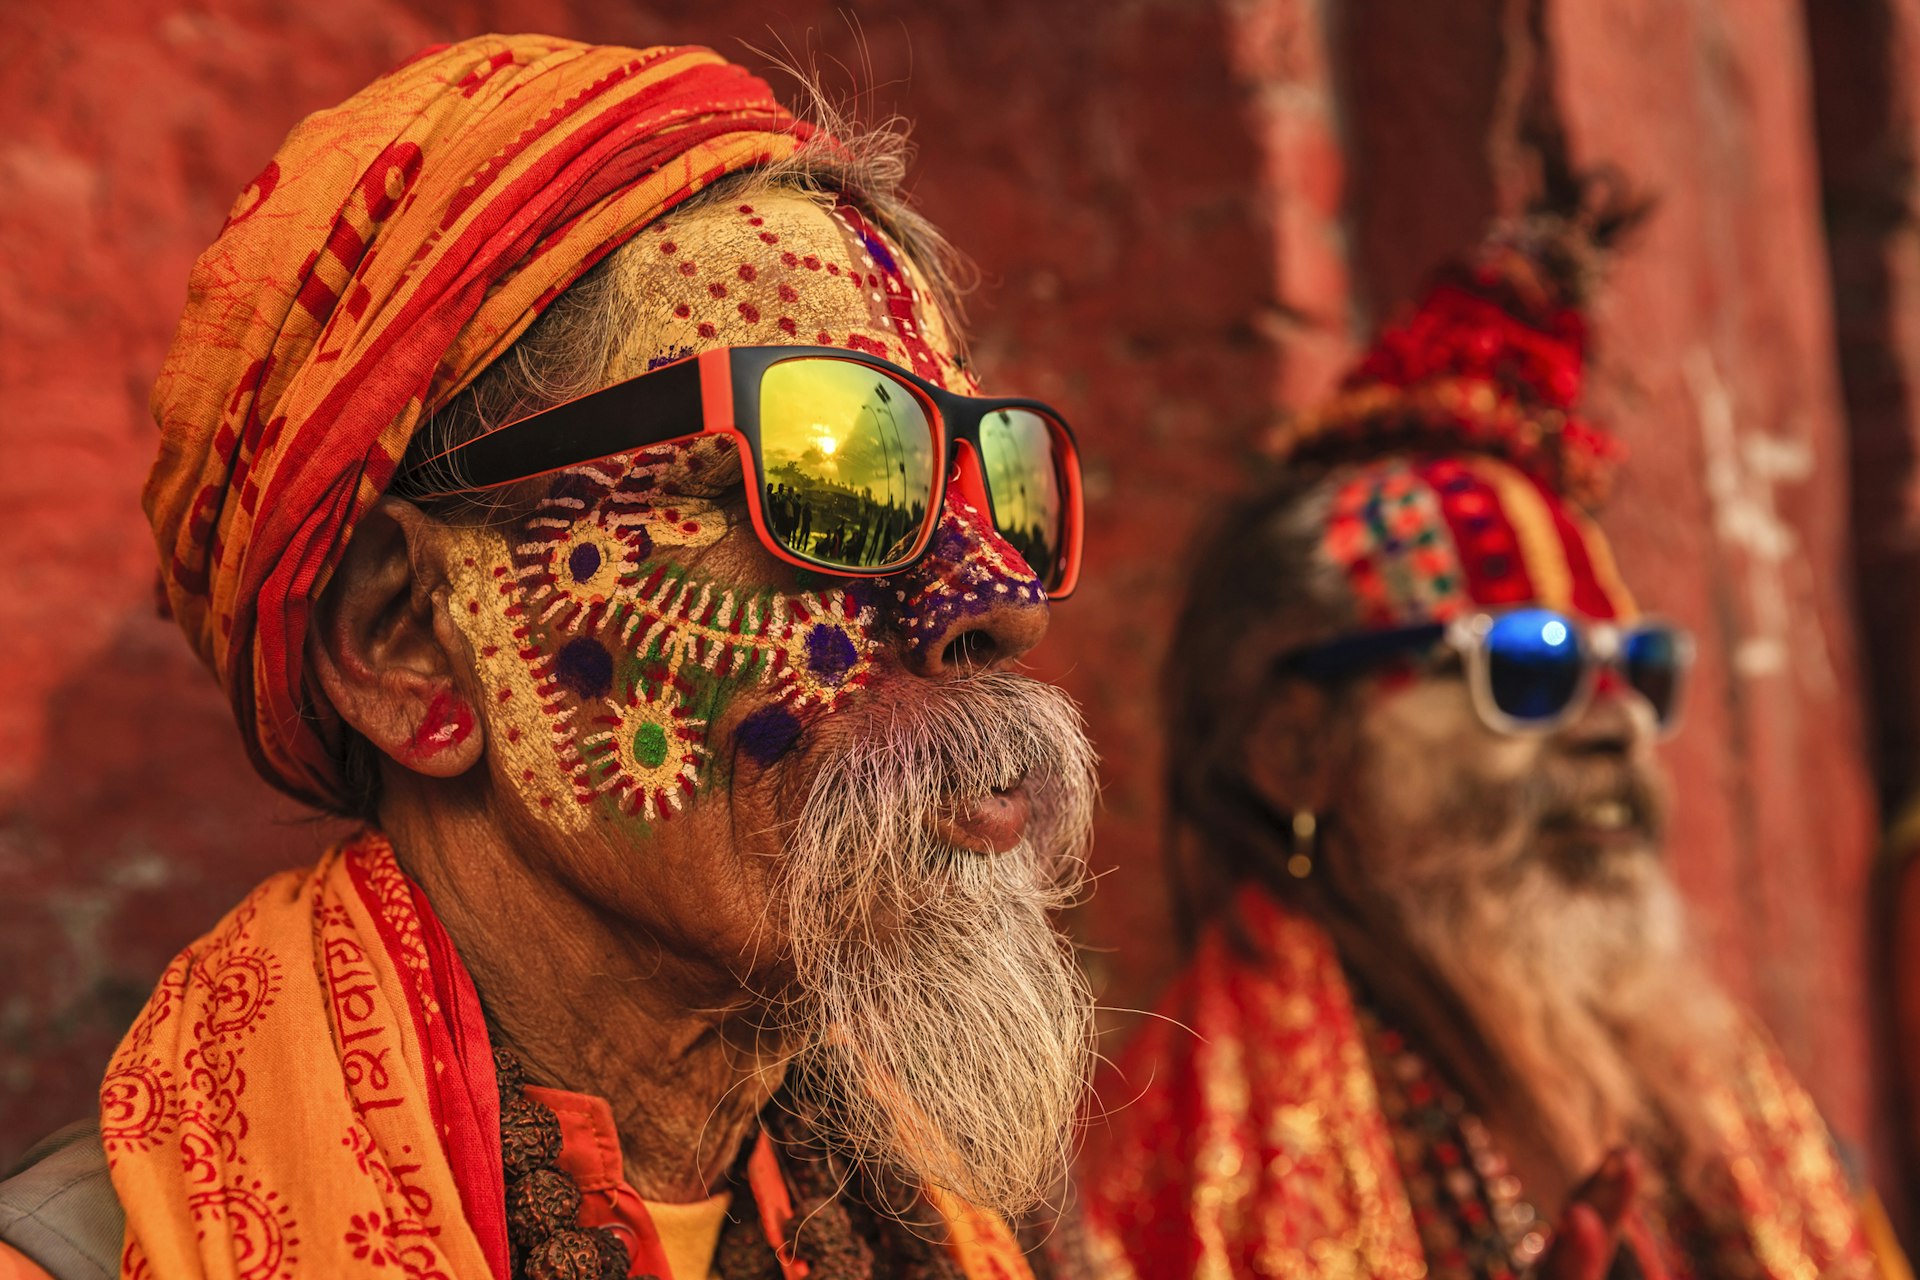 Two Hindu monks wearing brightly colored clothes and painted faces sit in a temple in India